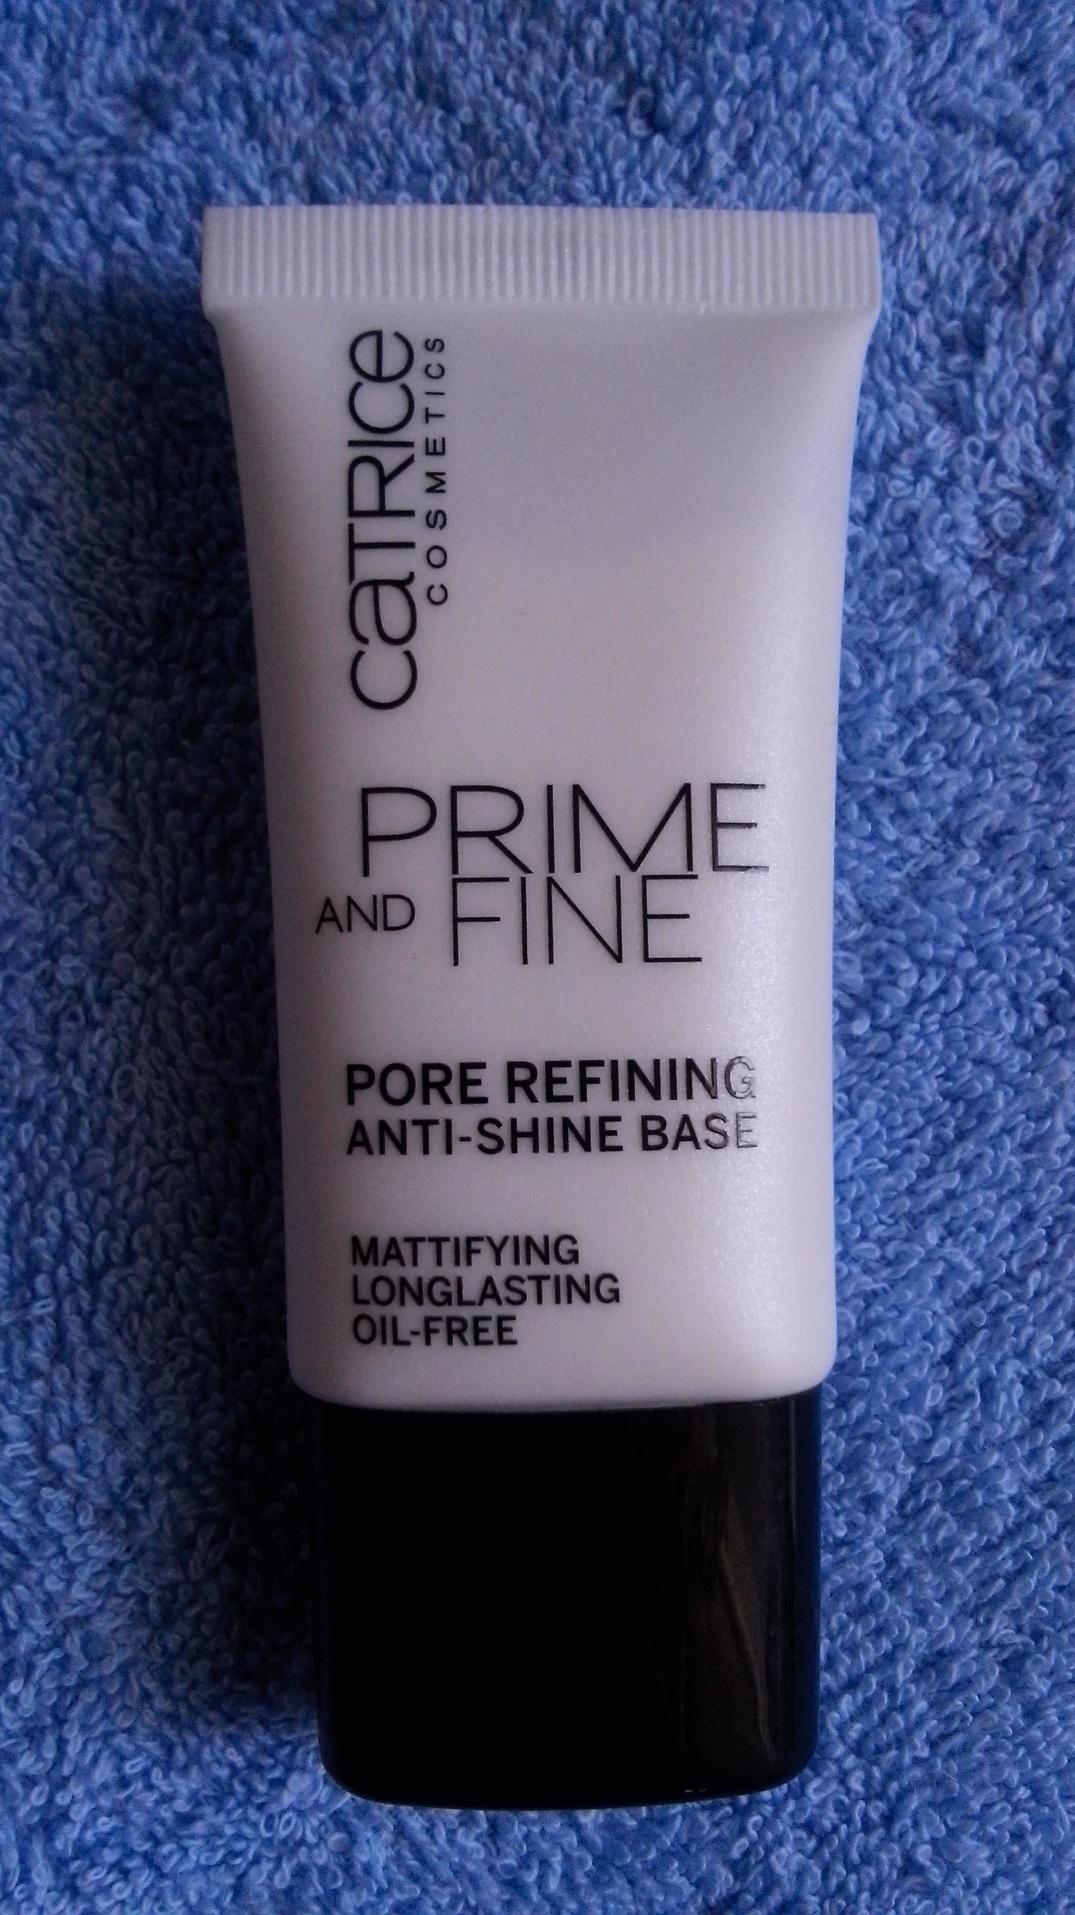 Eyebrow BEAUTY REVIEW: Primer Catrice Gel Palladio and